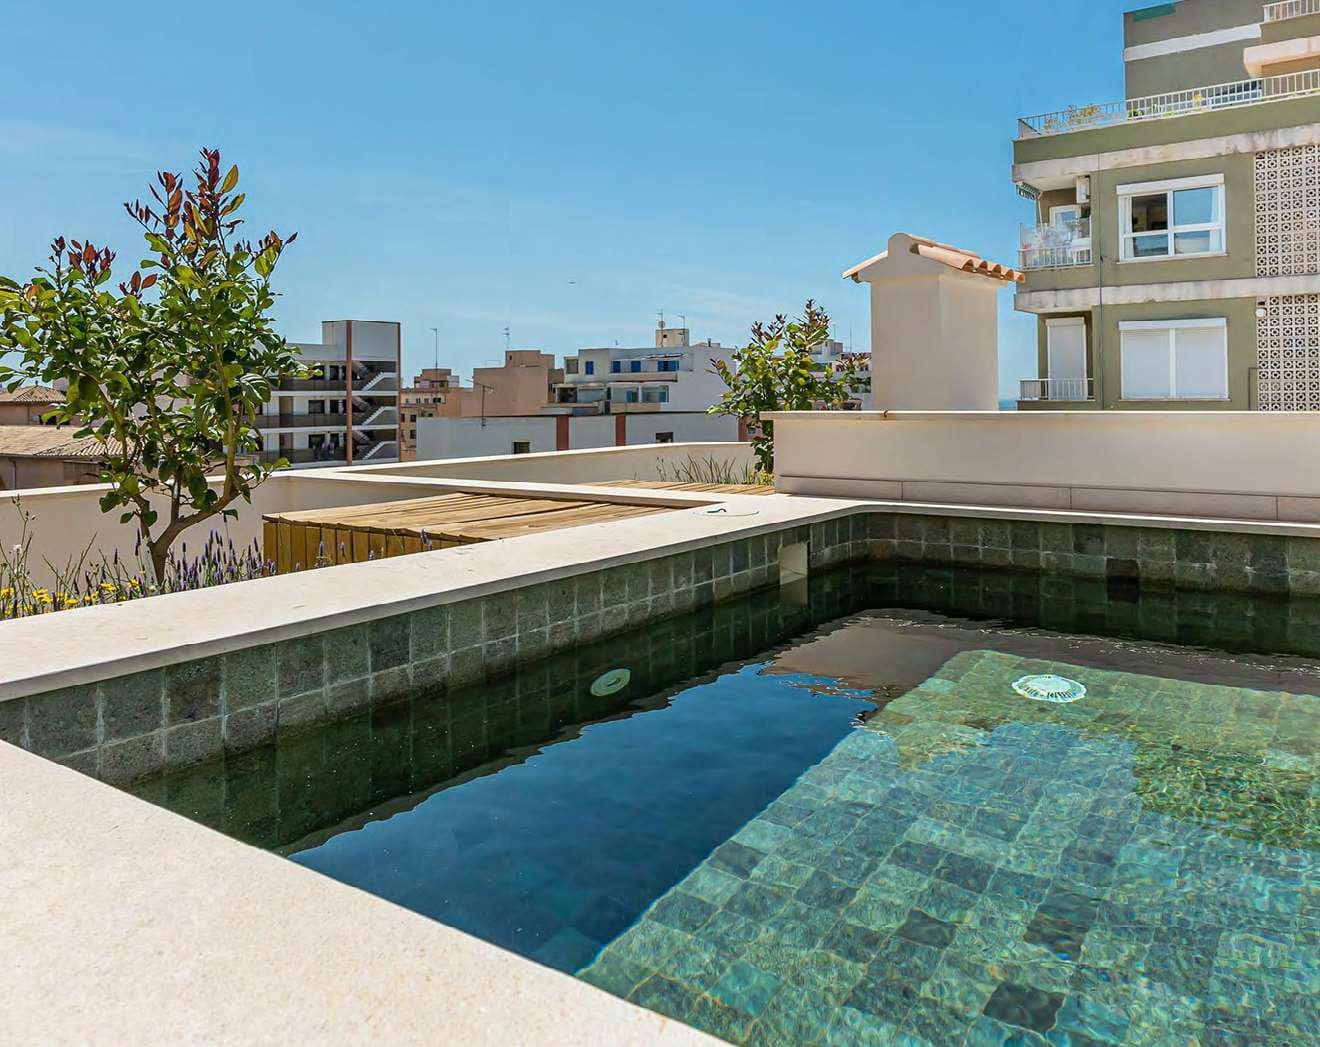 Luxurious duplex Penthouse with private rooftop terrace and pool in Santa Catalina